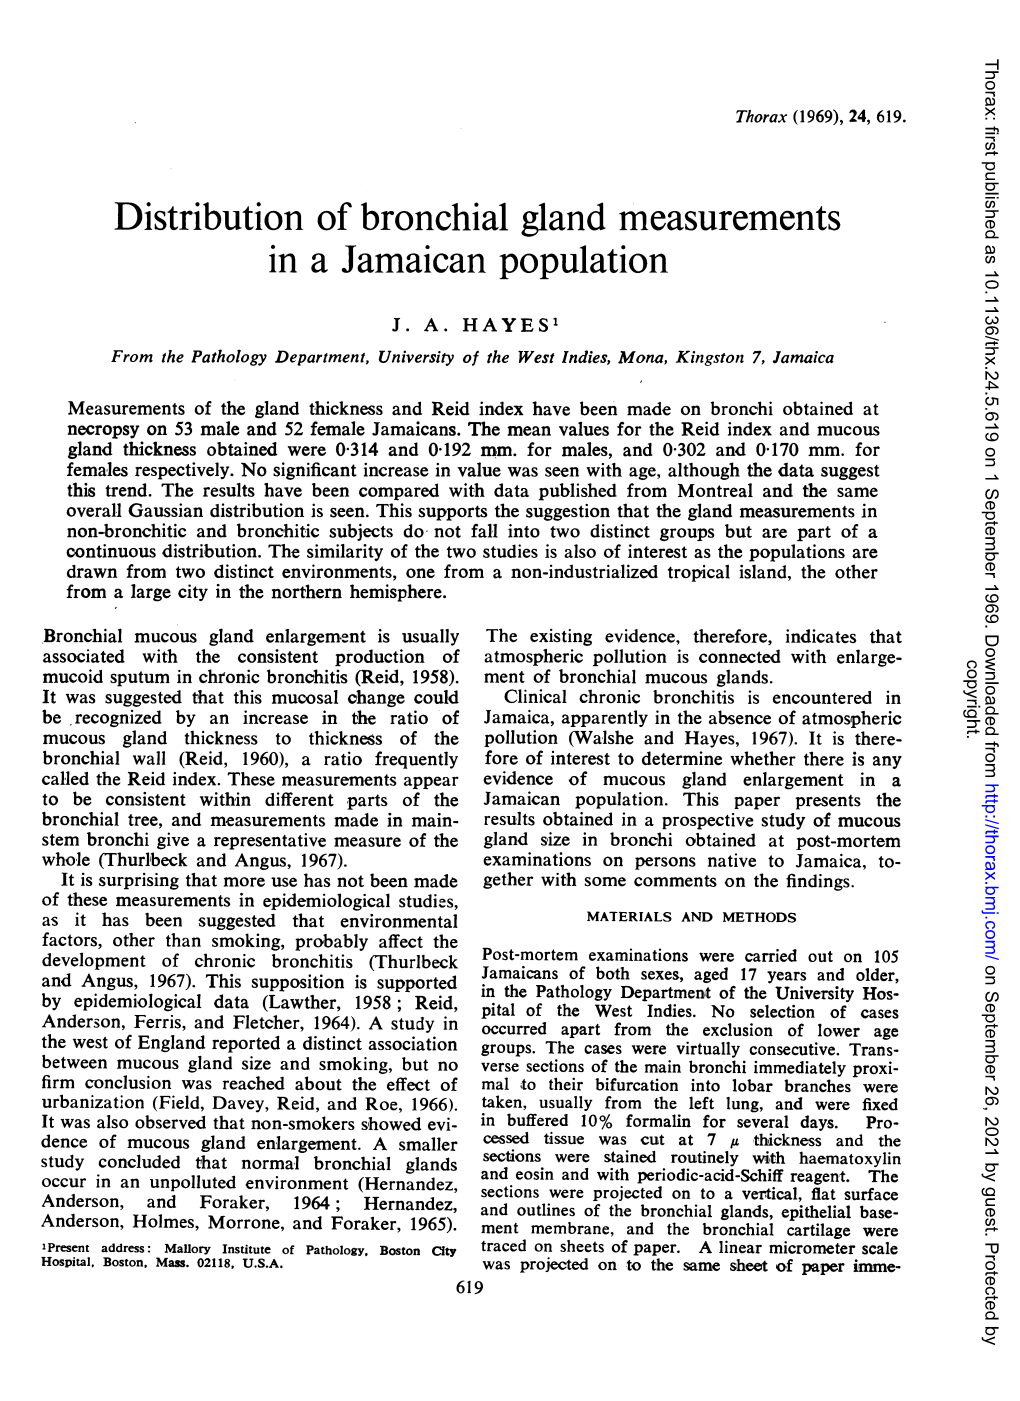 Distribution of Bronchial Gland Measurements in a Jamaican Population